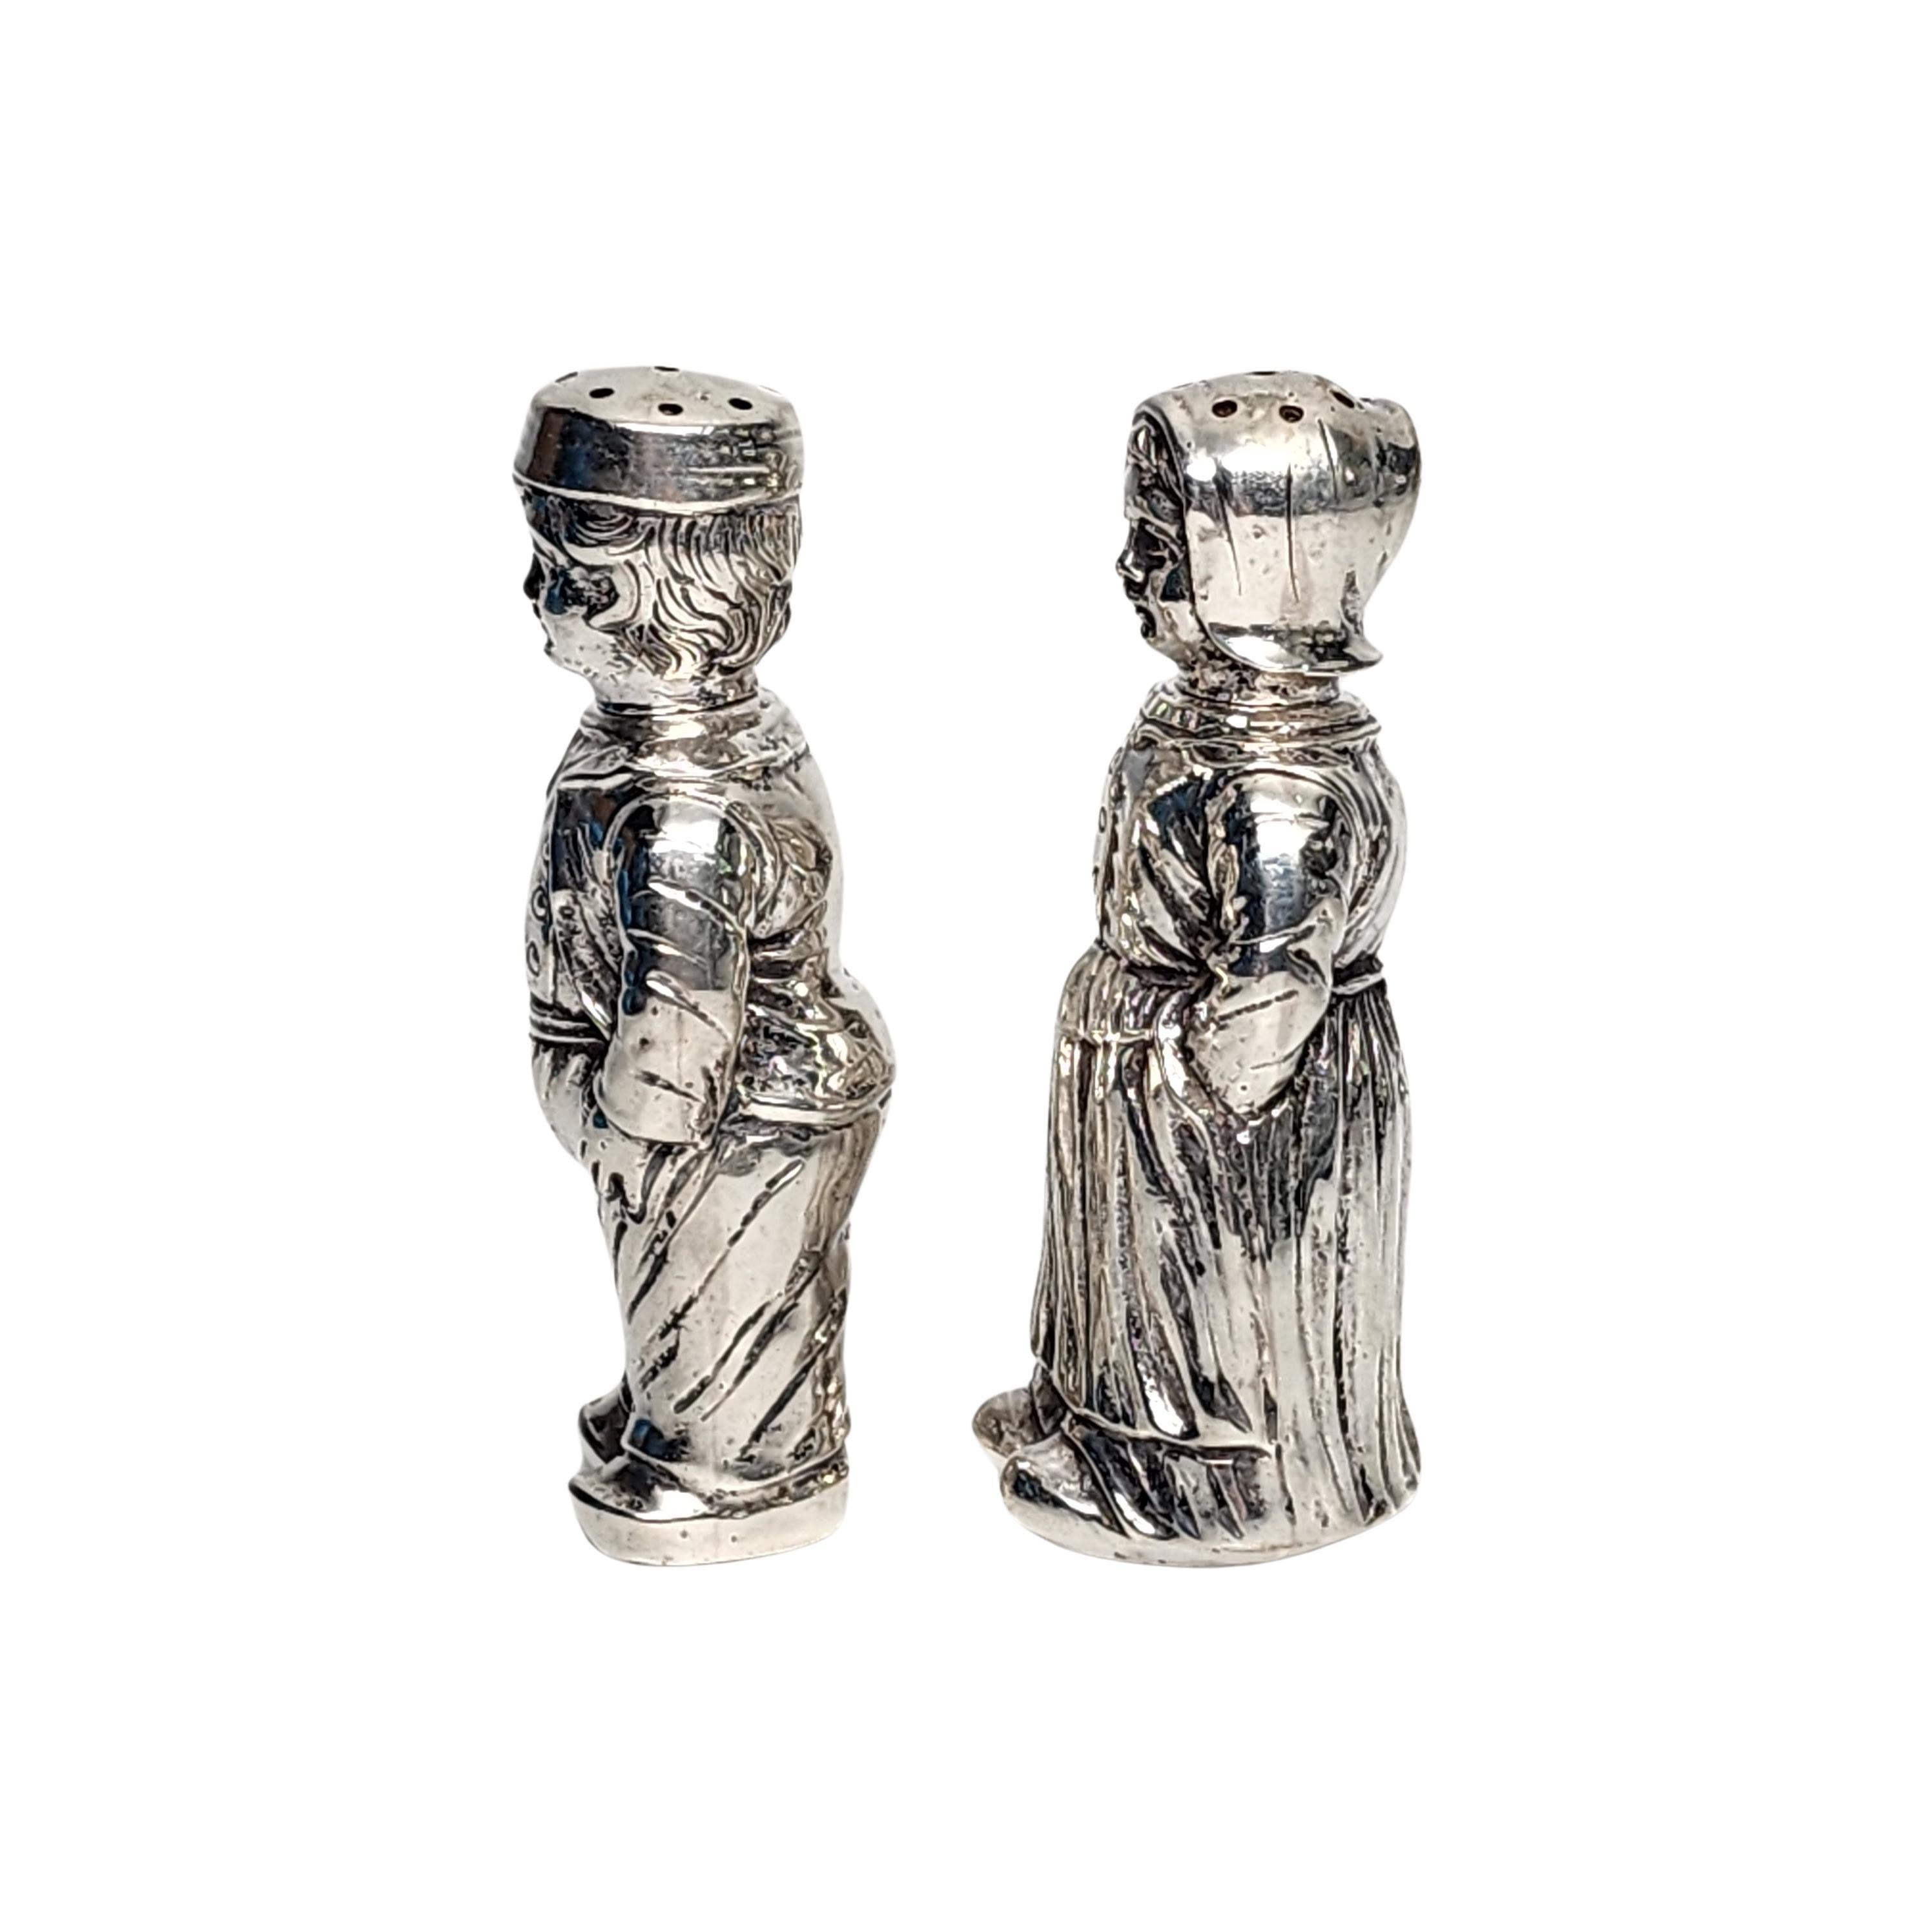 Vintage 830 silver figural Dutch boy and girl salt and pepper shakers.

A pair of salt and pepper shakers, 1 boy and 1 girl in highly detailed traditional clothing. Each head twists off to fill, with notch and tab closures.

Measures approx 3 1/8